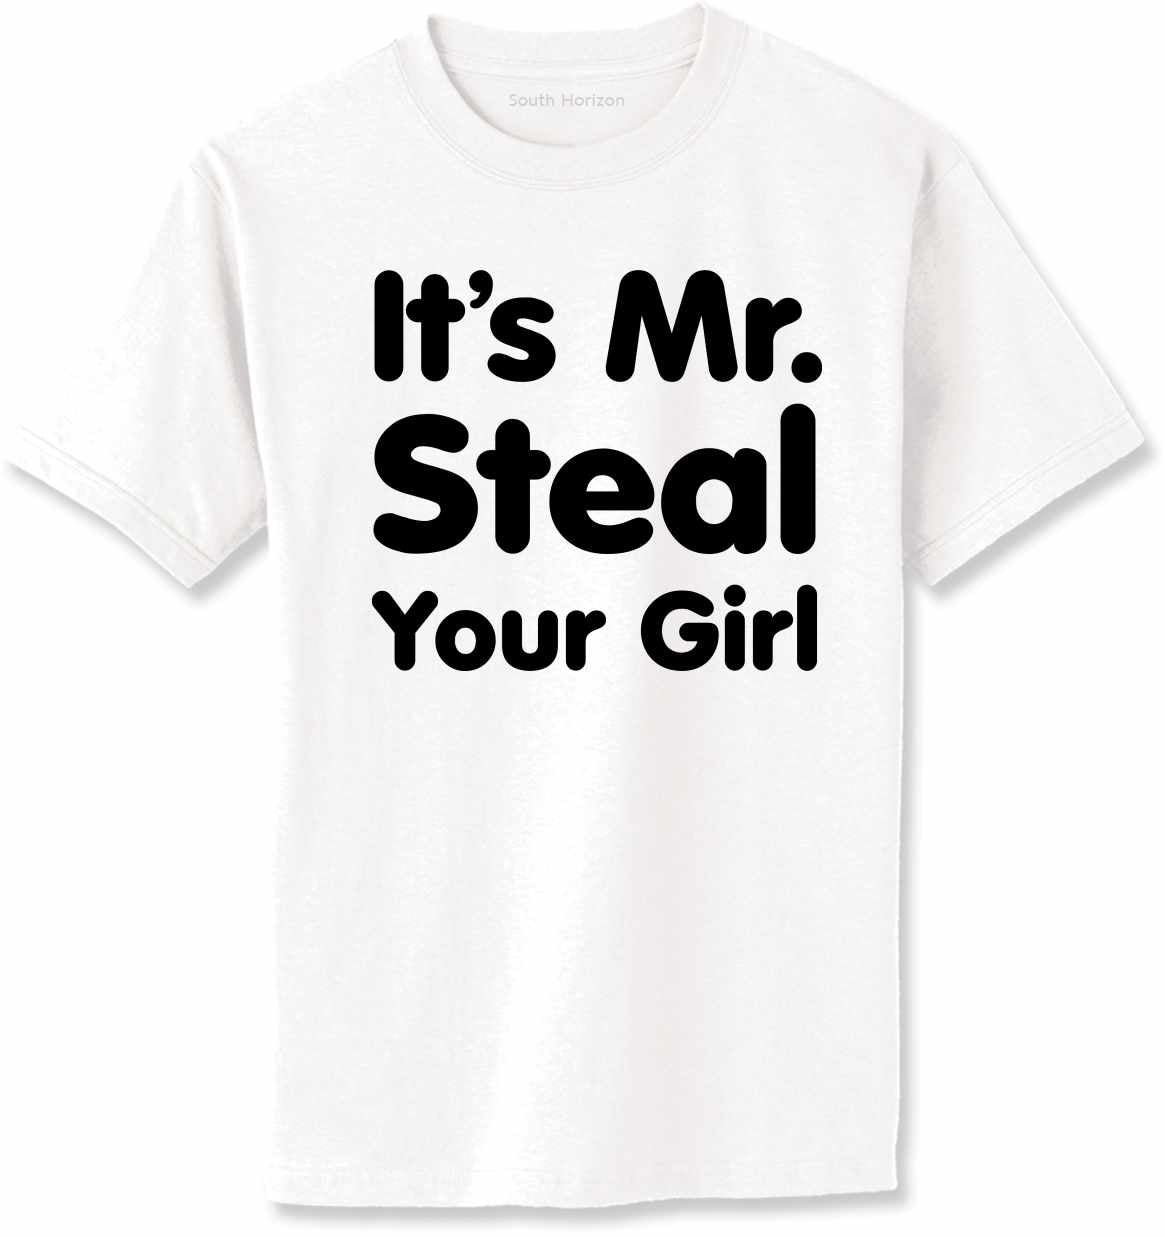 It's Mr. Steal Your Girl Adult T-Shirt (#905-1)